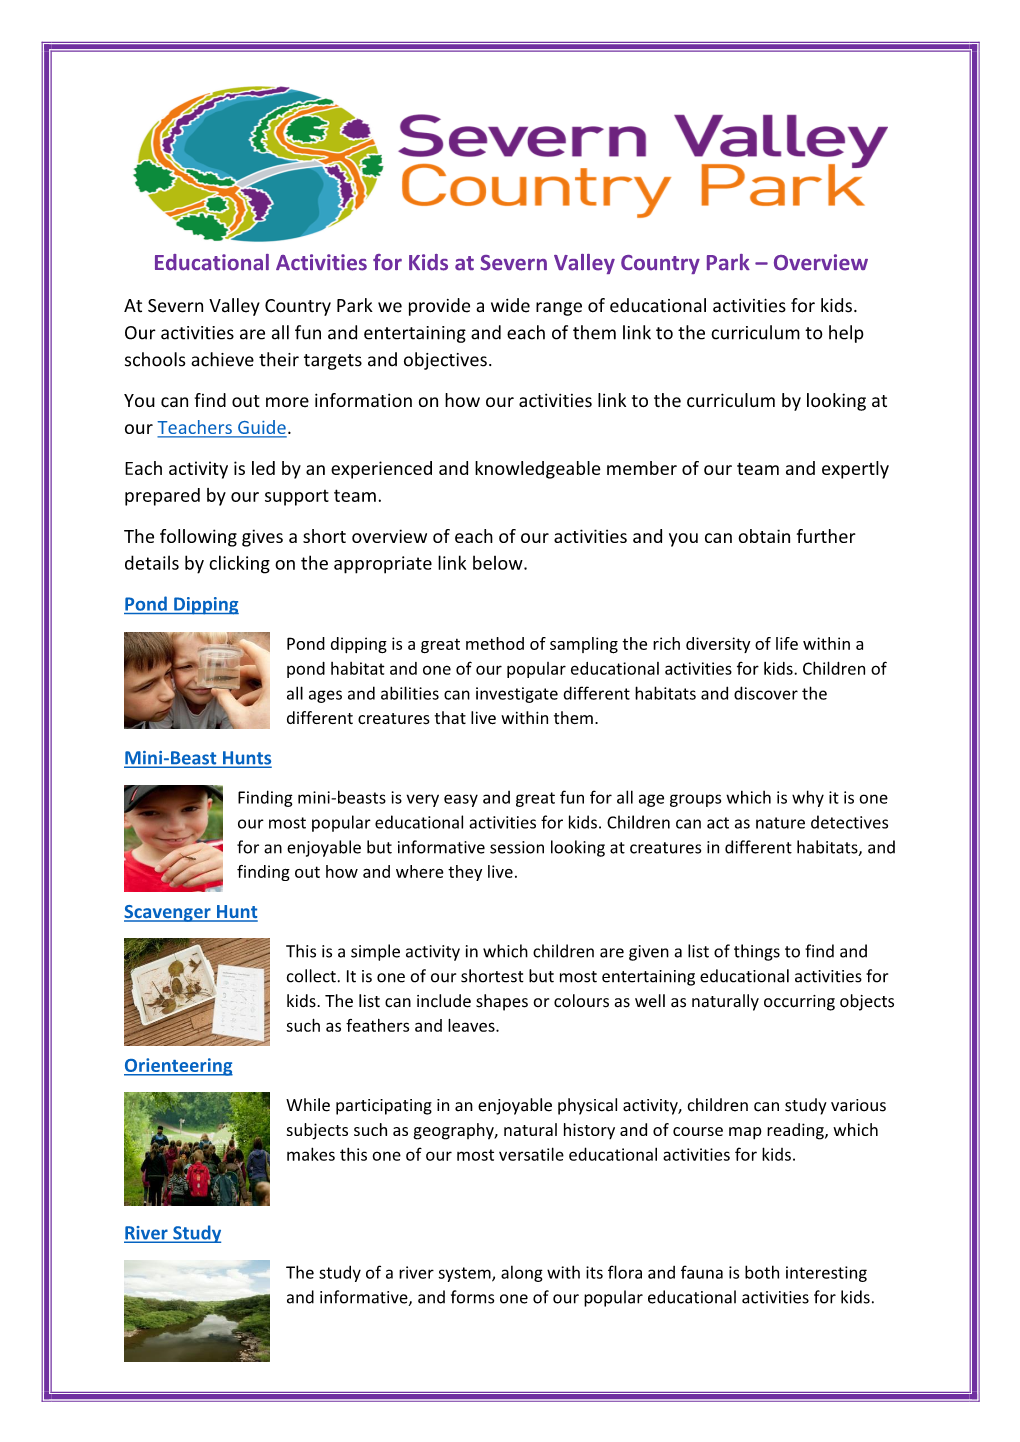 Educational Activities for Kids at Severn Valley Country Park – Overview at Severn Valley Country Park We Provide a Wide Range of Educational Activities for Kids